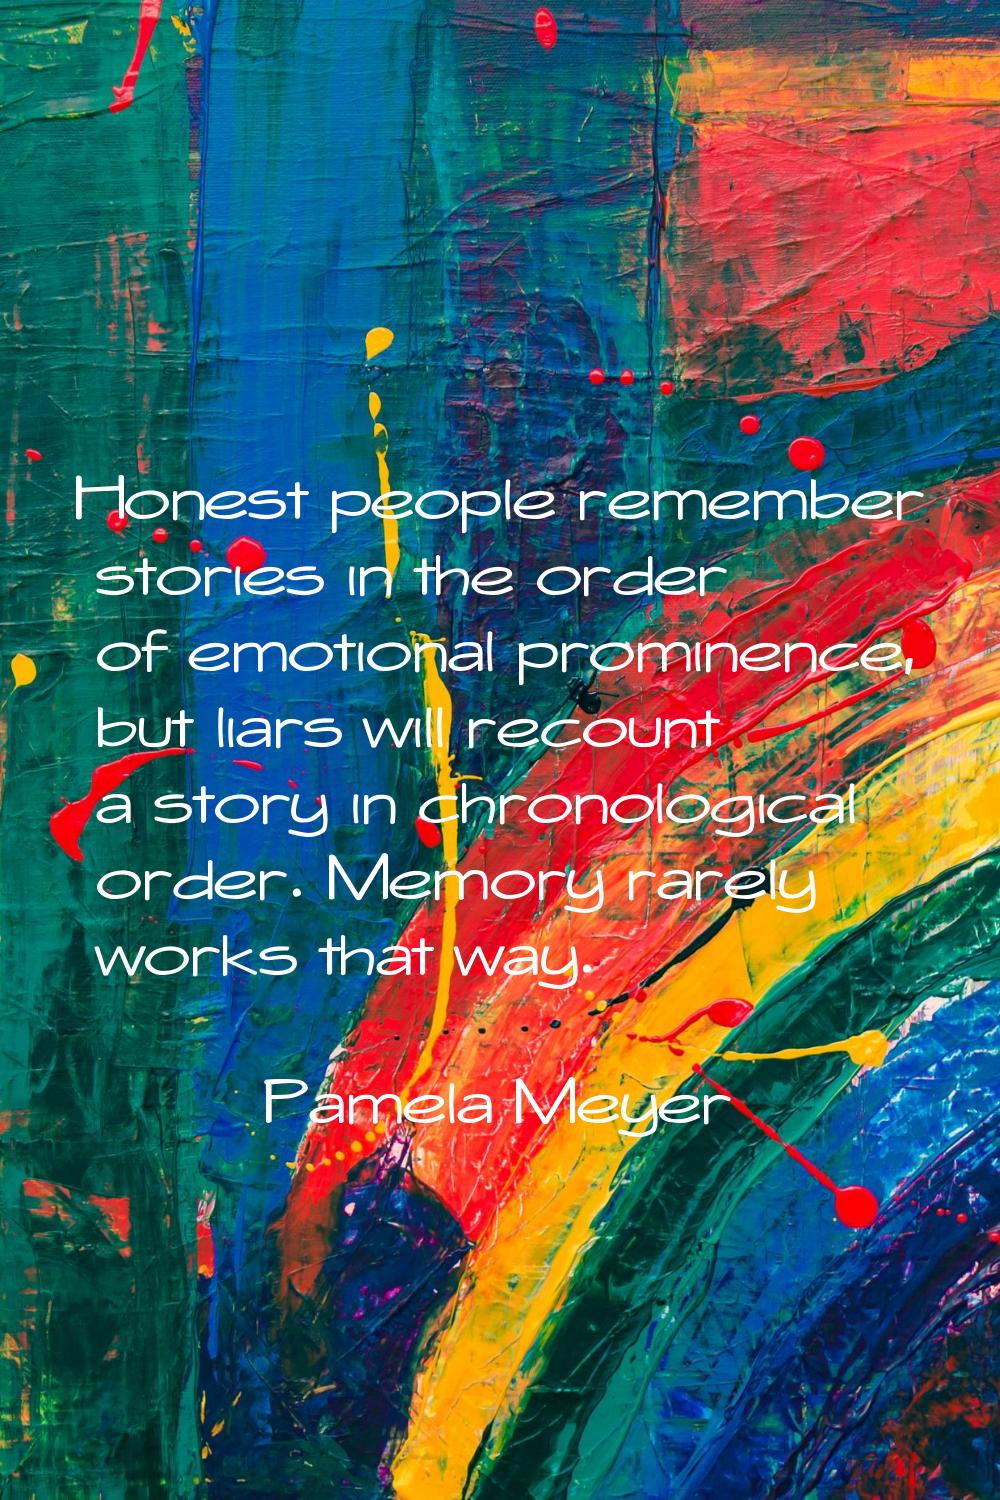 Honest people remember stories in the order of emotional prominence, but liars will recount a story